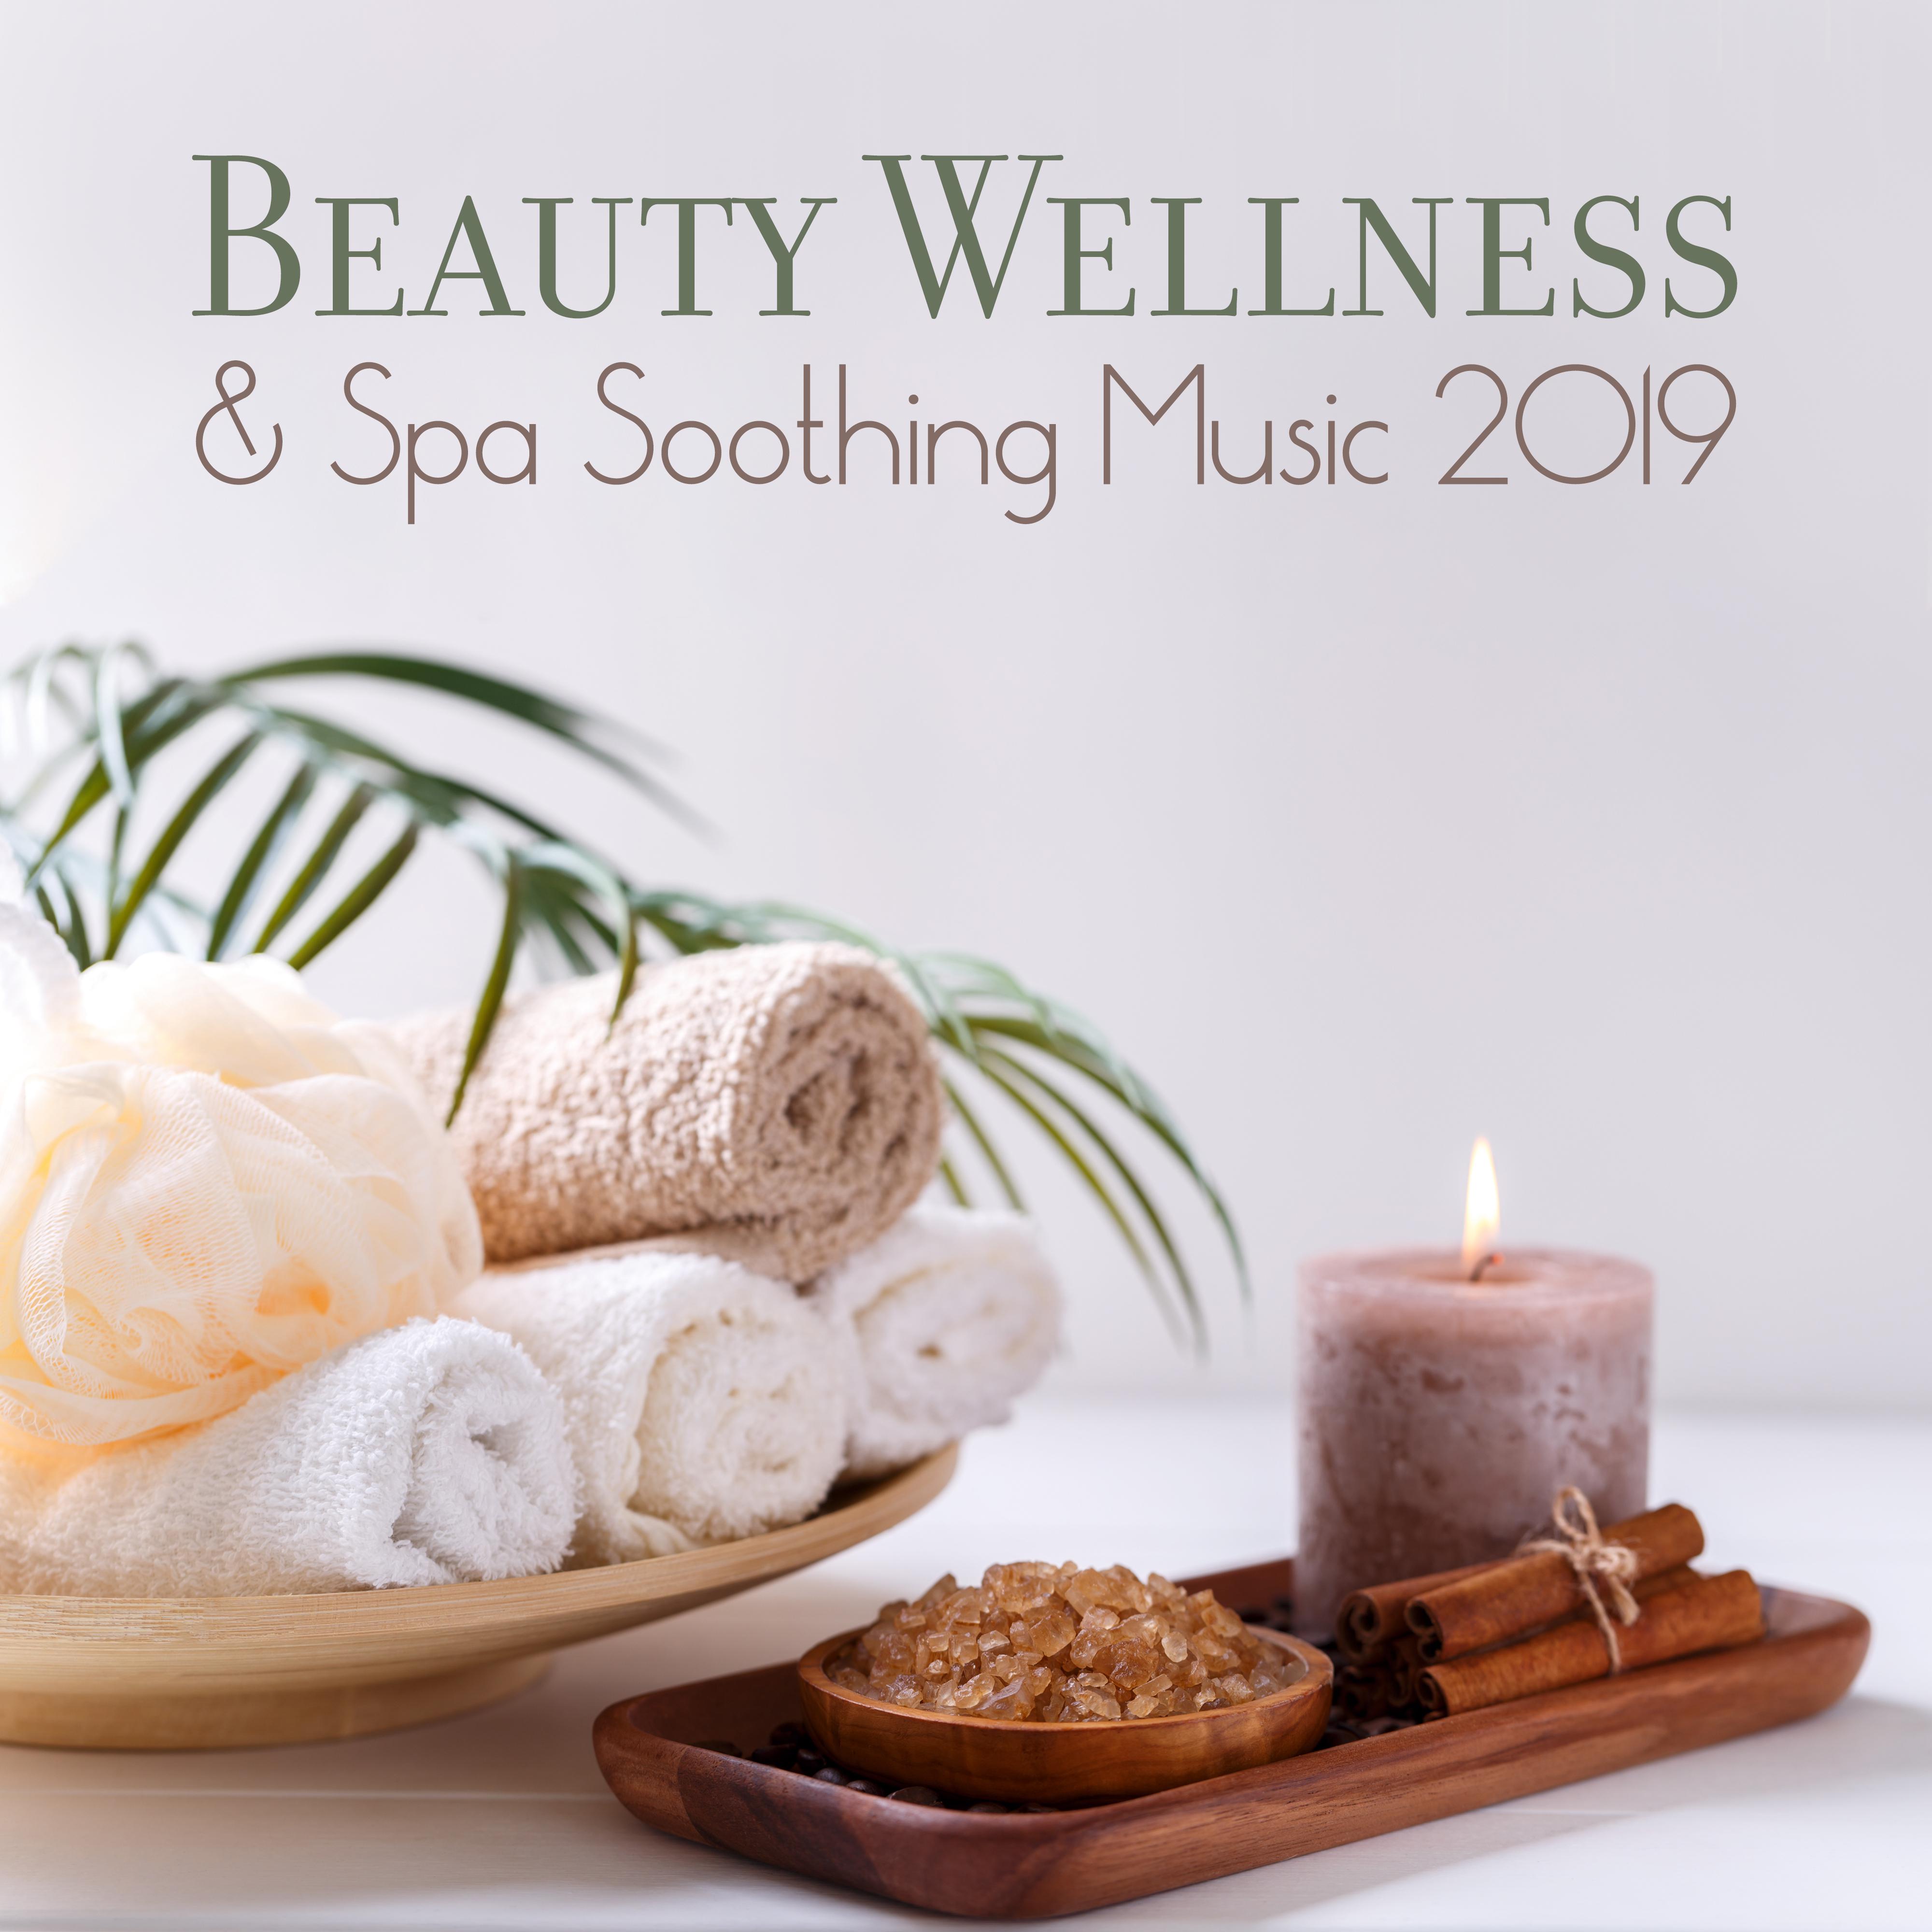 Beauty Wellness & Spa Soothing Music 2019